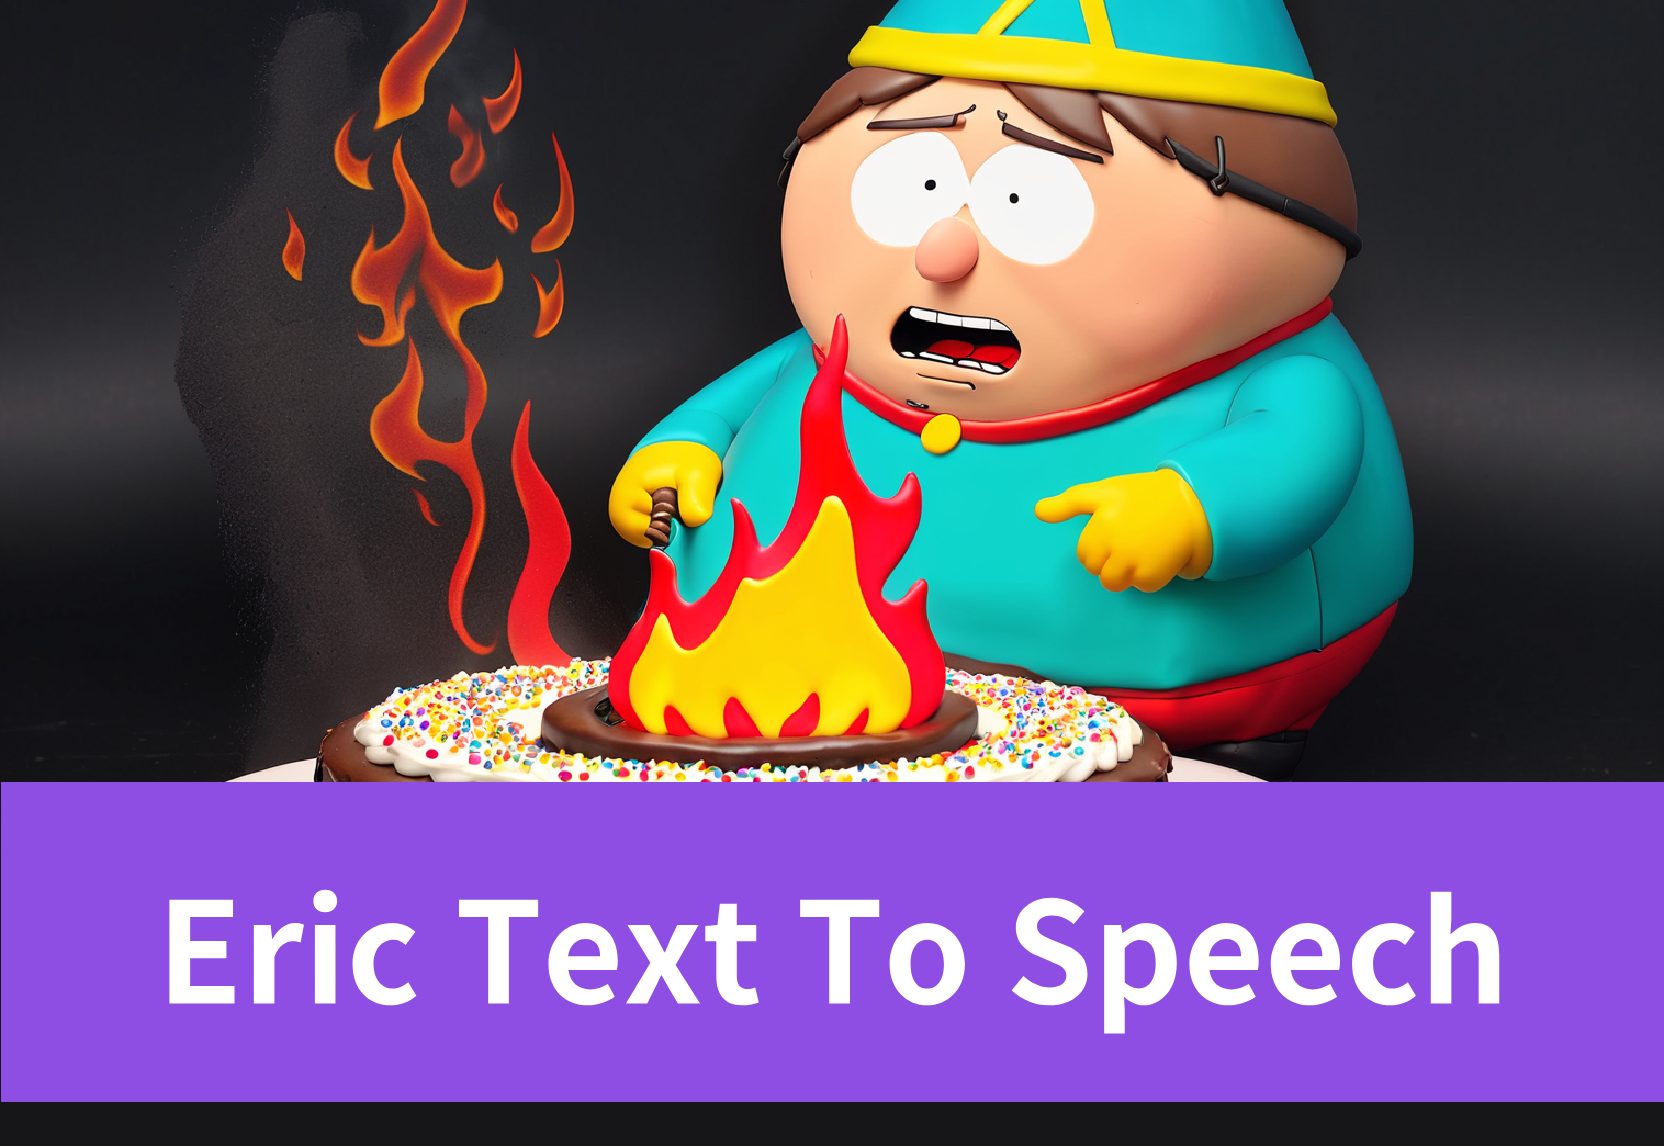 Exploring Eric Text to Speech: From South Park to Speech Synthesis